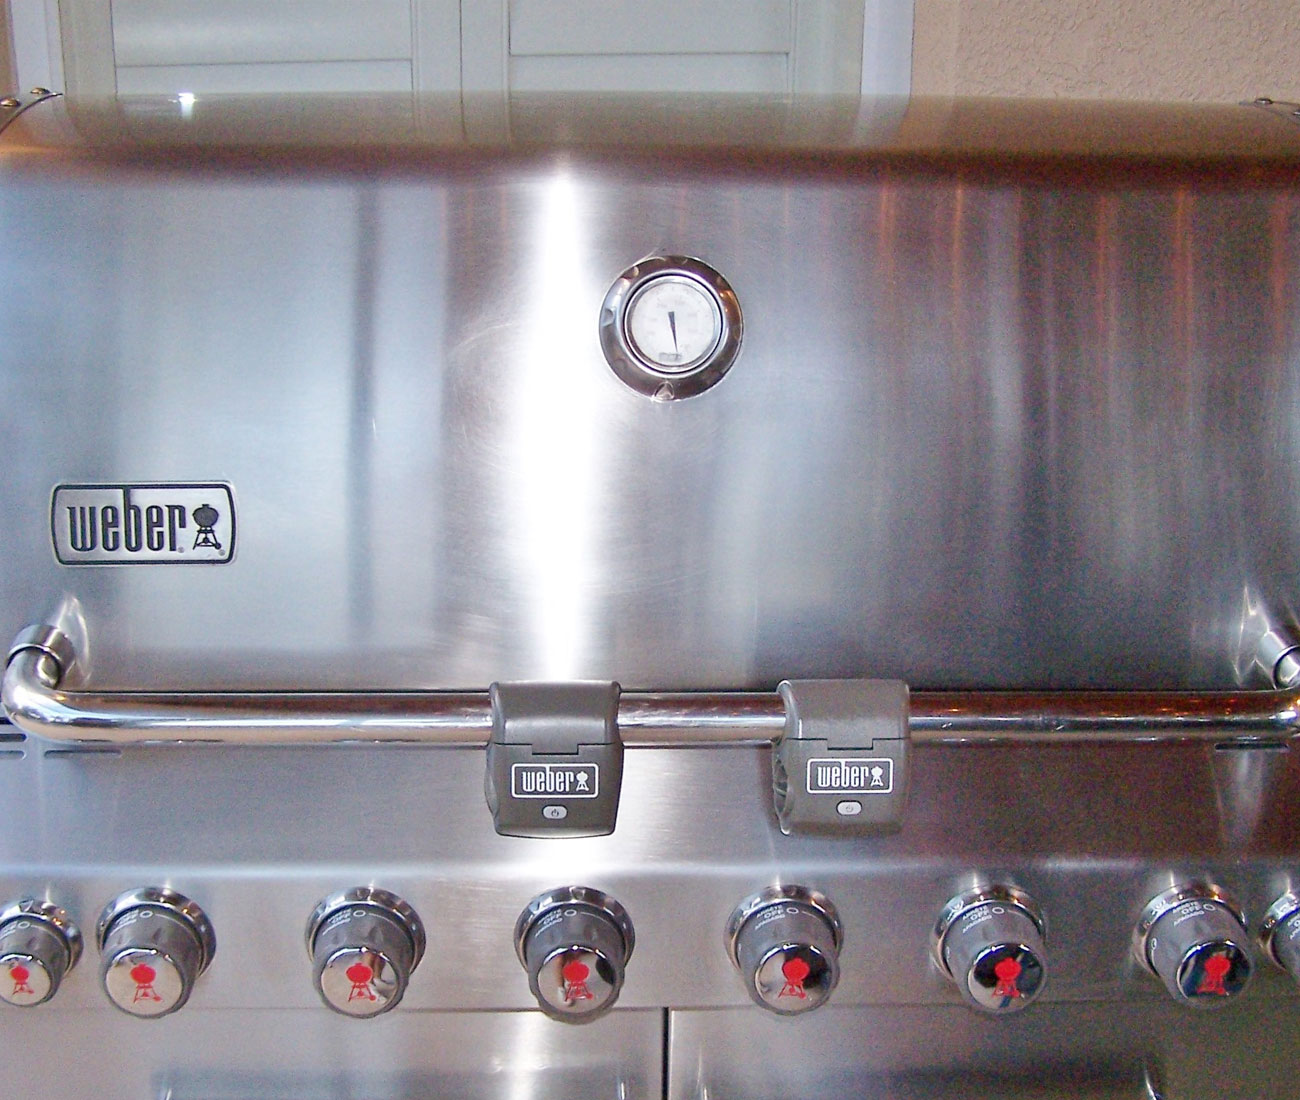 Restored sparkling Weber Grill cleaned by Grill Cleaning Company Sarasota